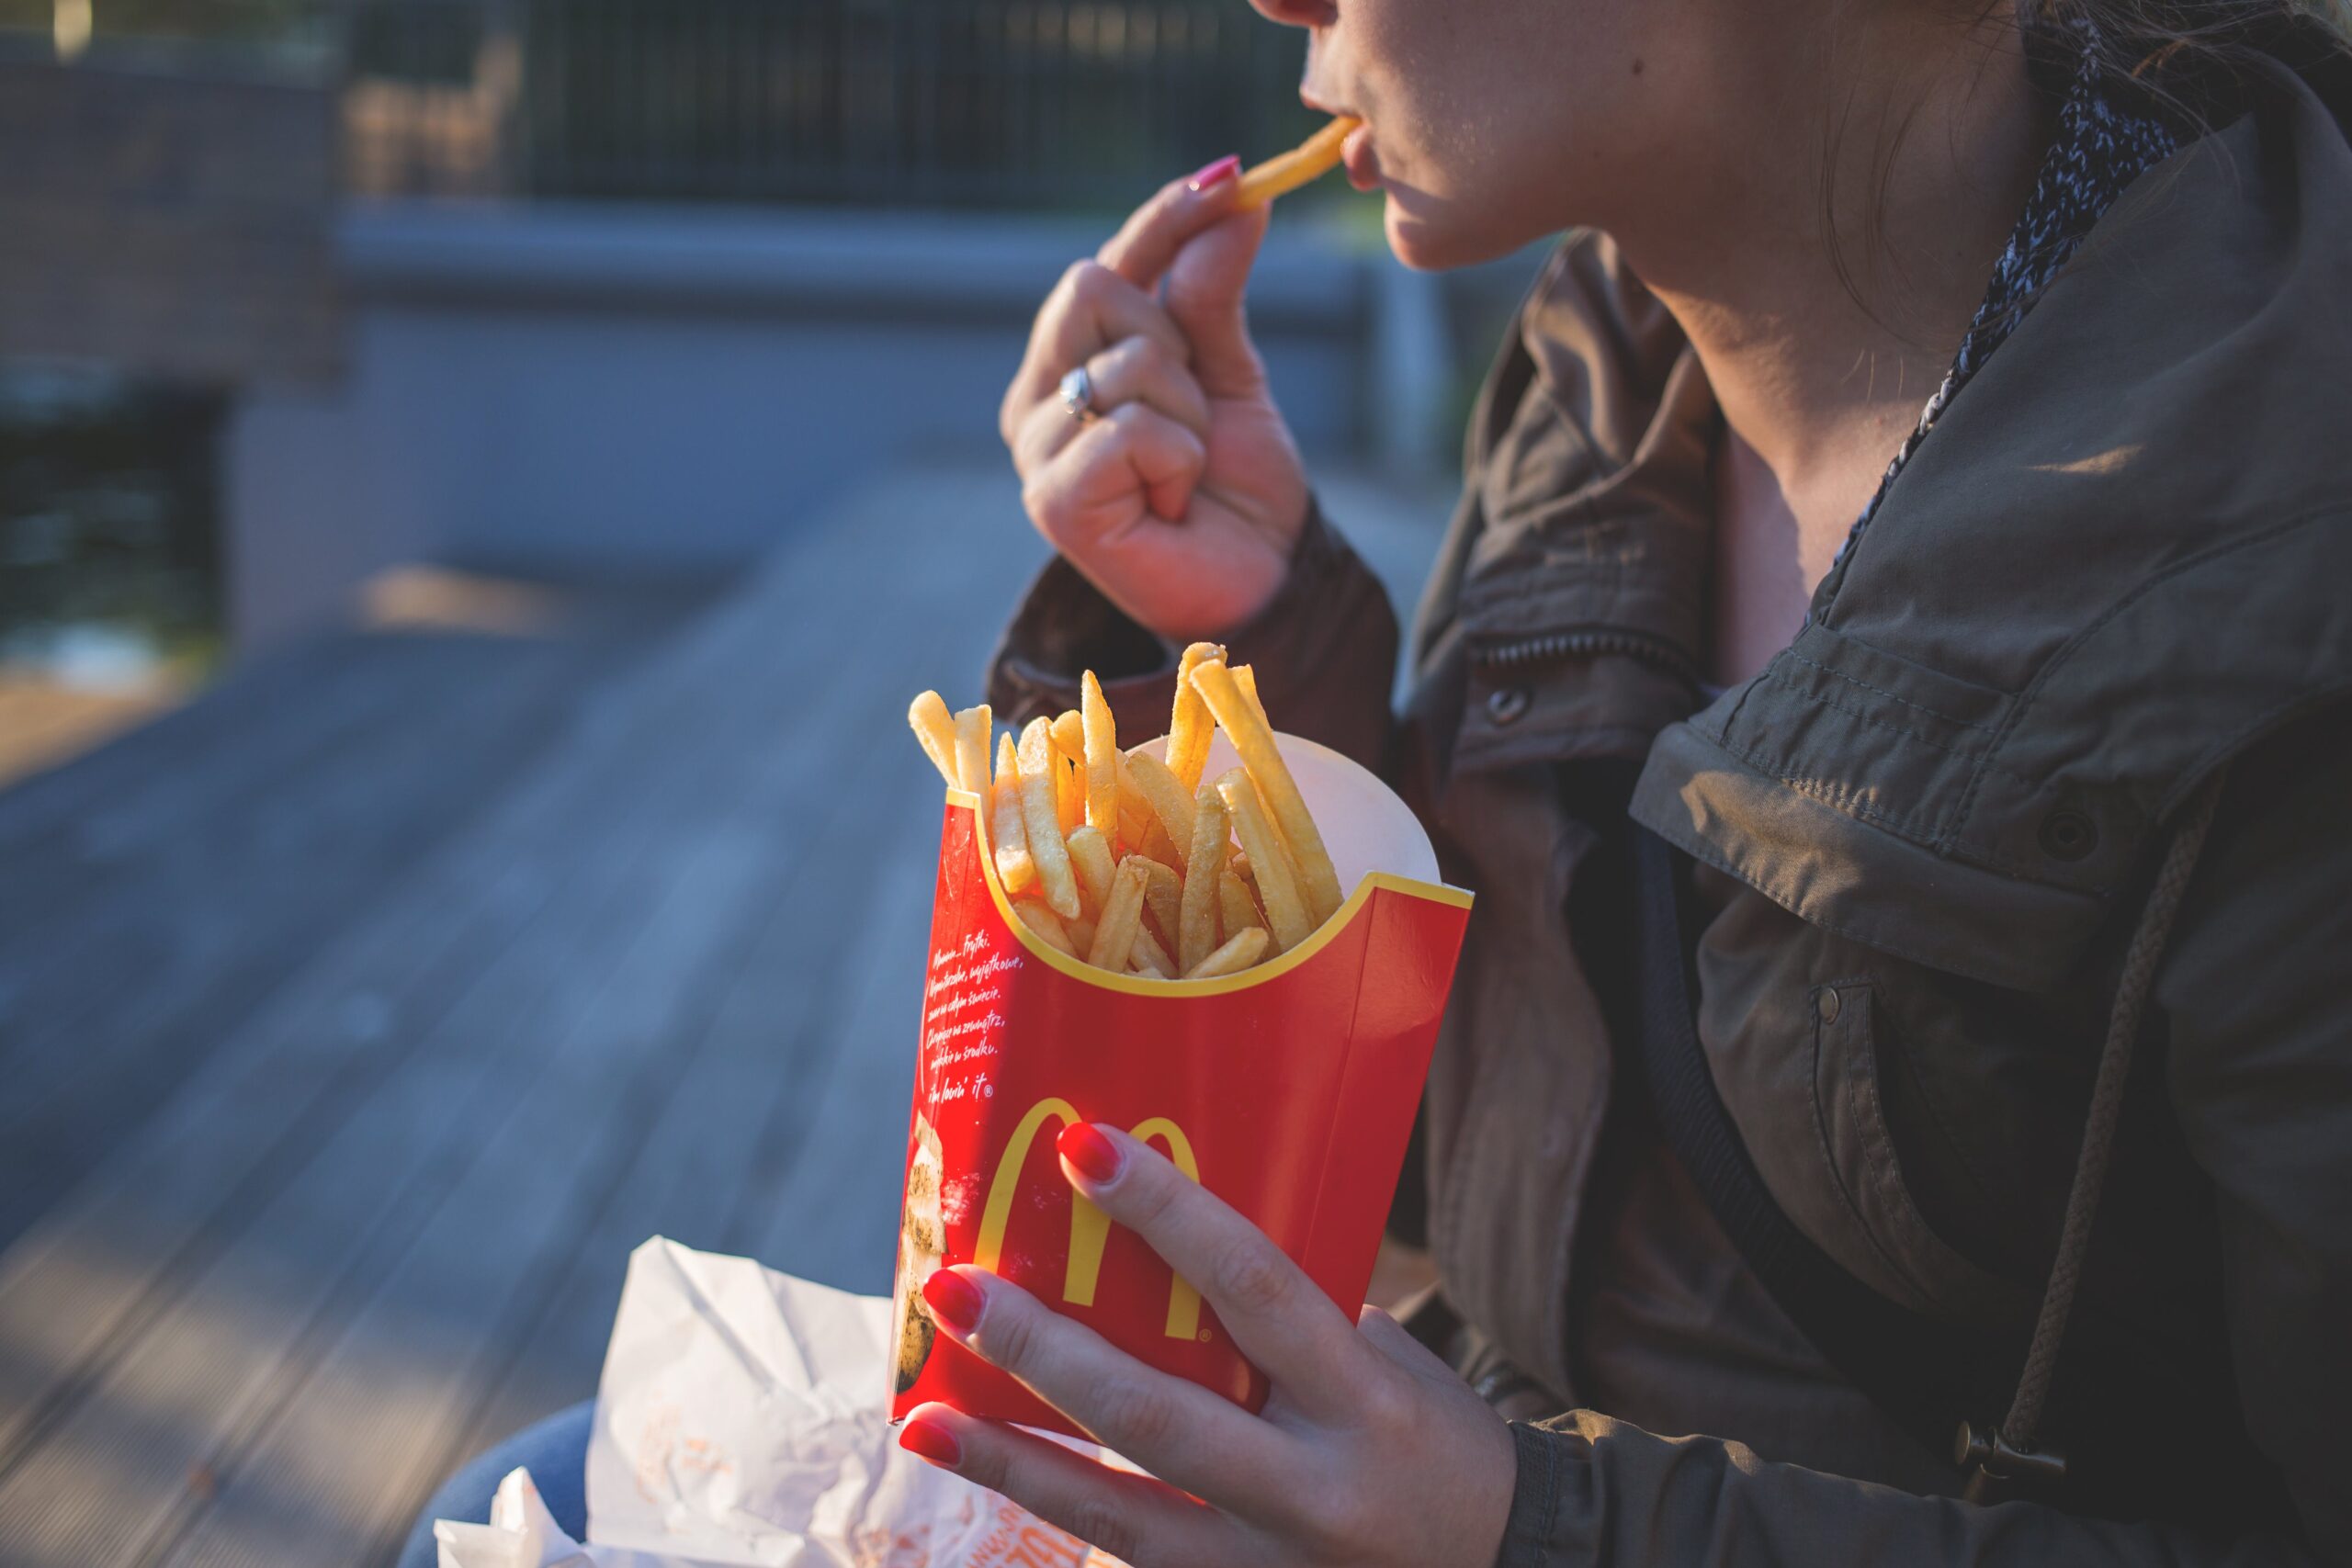 Woman eating fries from McDonalds, one of the most well known examples of colour use in commerical applications.